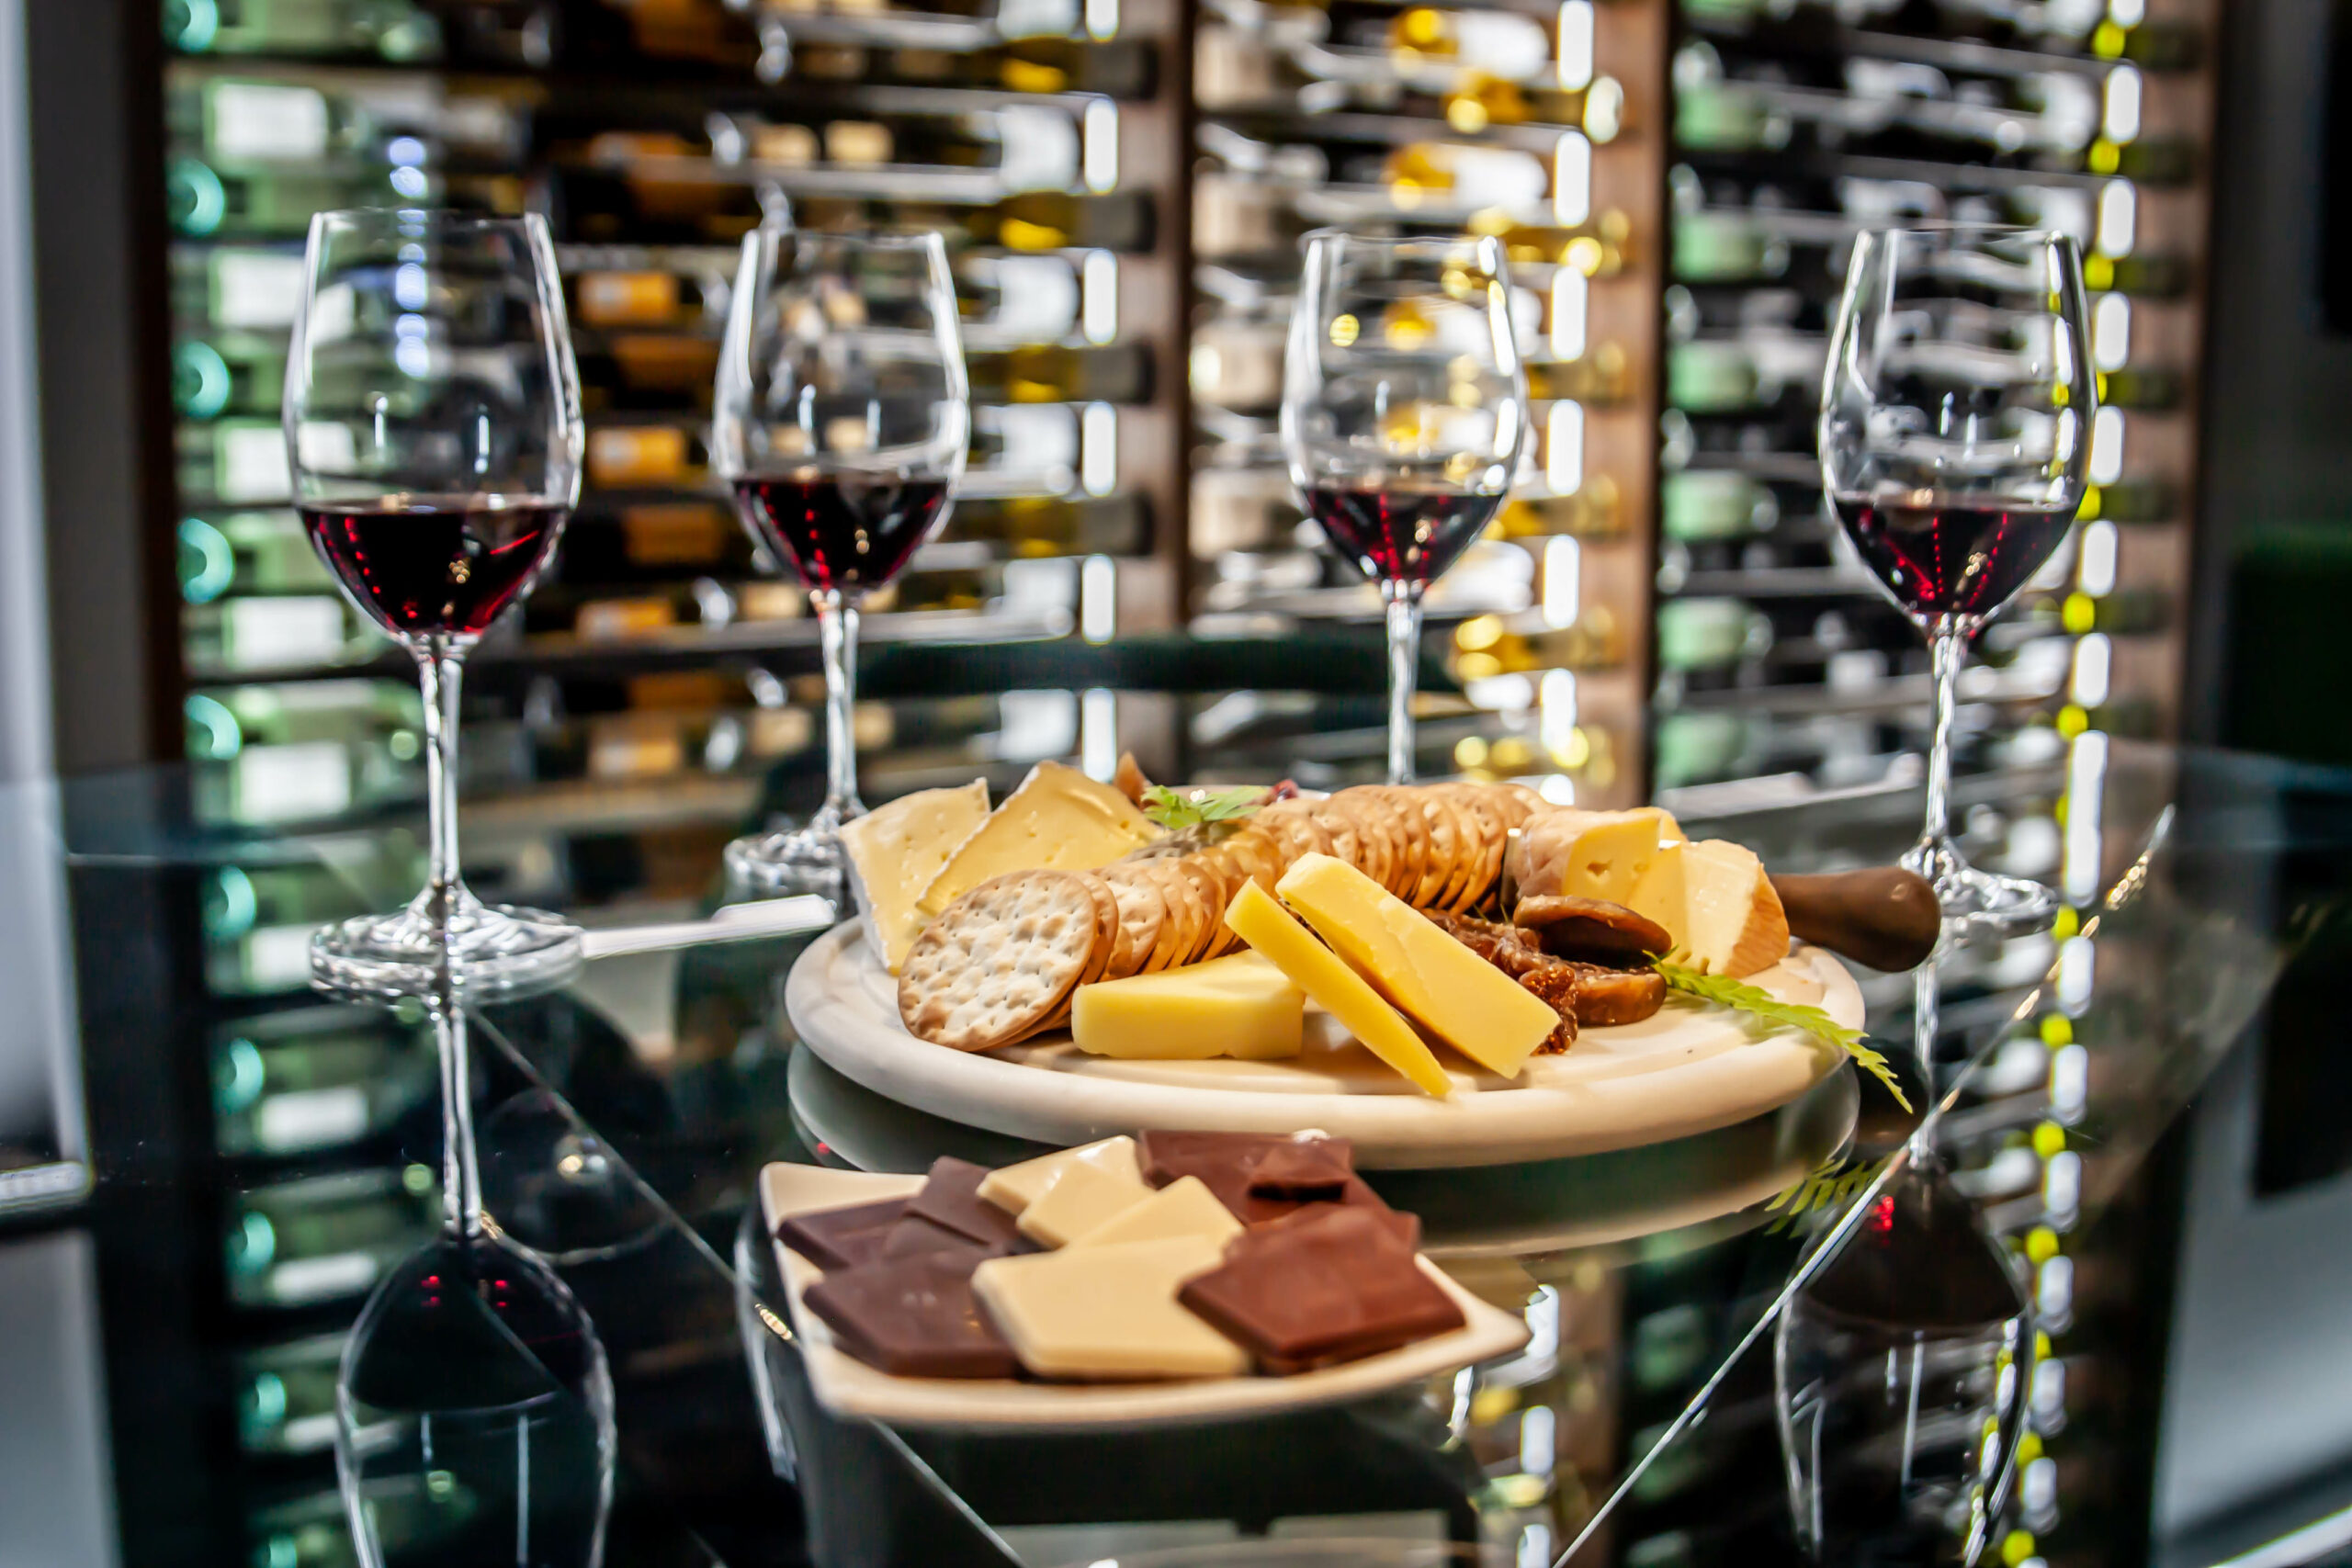 Wine, Cheese & Chocolate Tasting with Personalised Etched Philosophy as a Take Home Gift